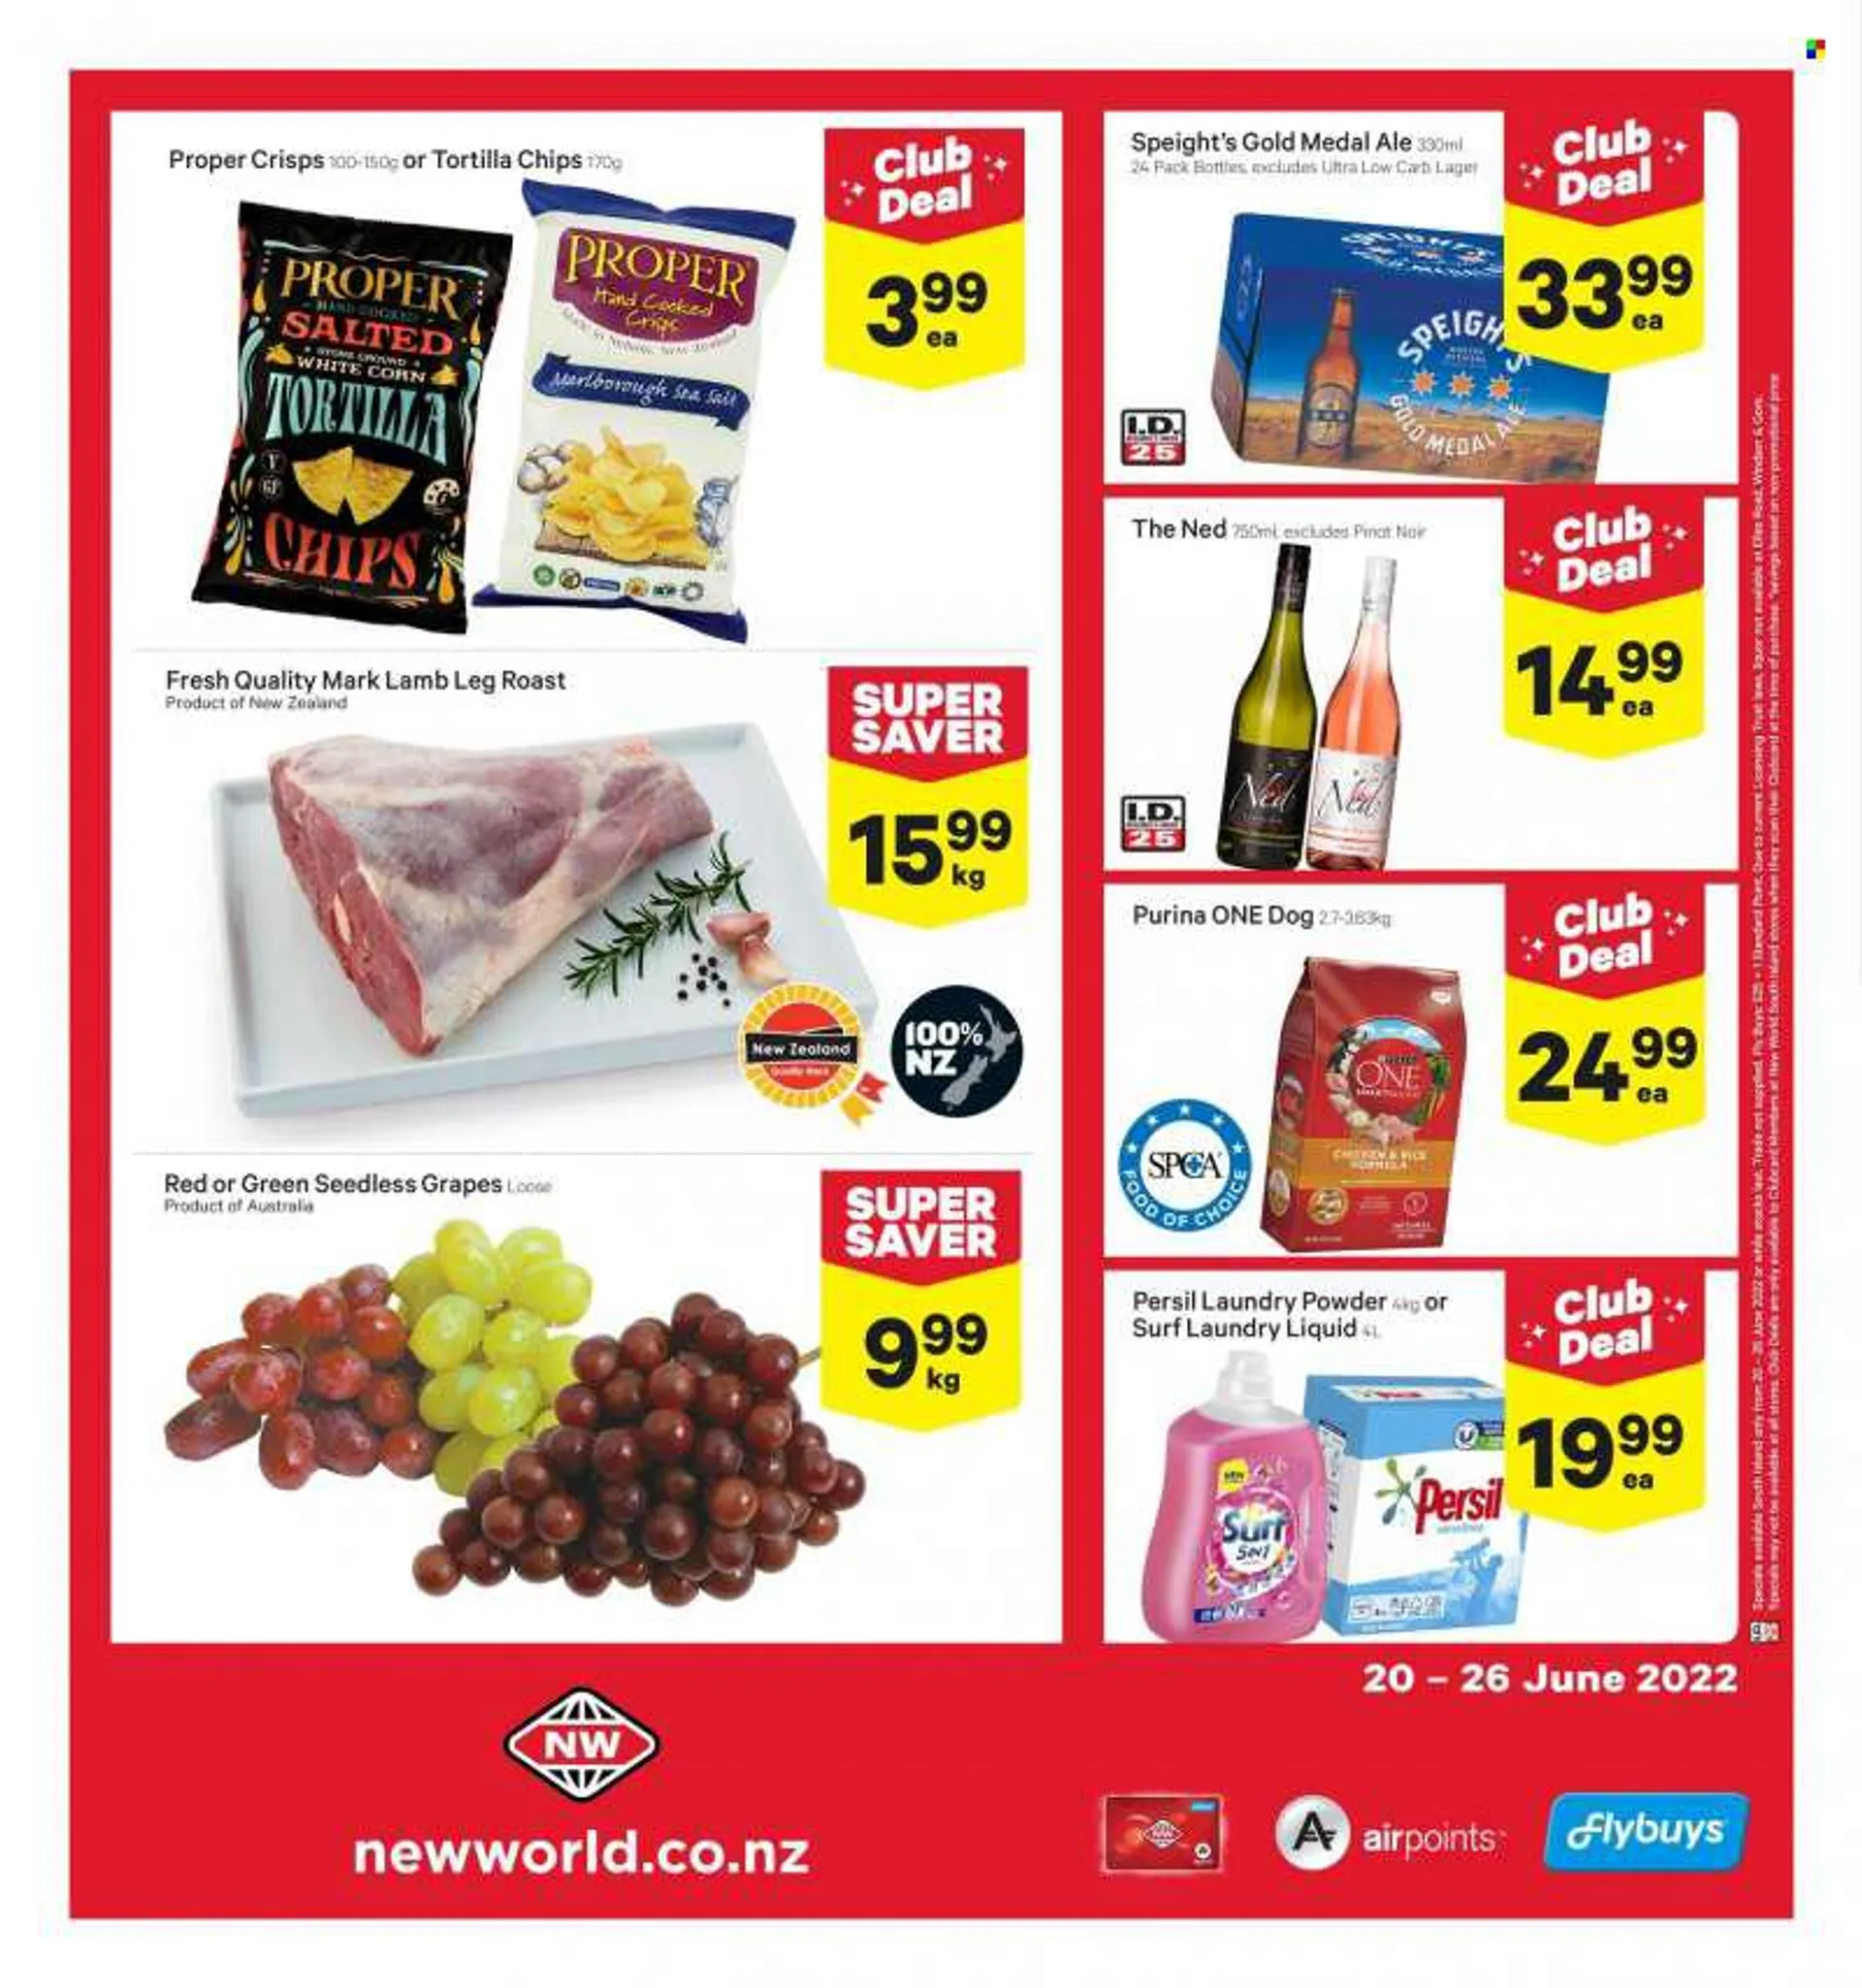 New World mailer - 20.06.2022 - 26.06.2022 - Sales products - grapes, seedless grapes, tortilla chips, chips, red wine, wine, Pinot Noir, beer, Lager, lamb meat, lamb leg, Persil, laundry detergent, laundry powder, Surf, Purina. Page 2.